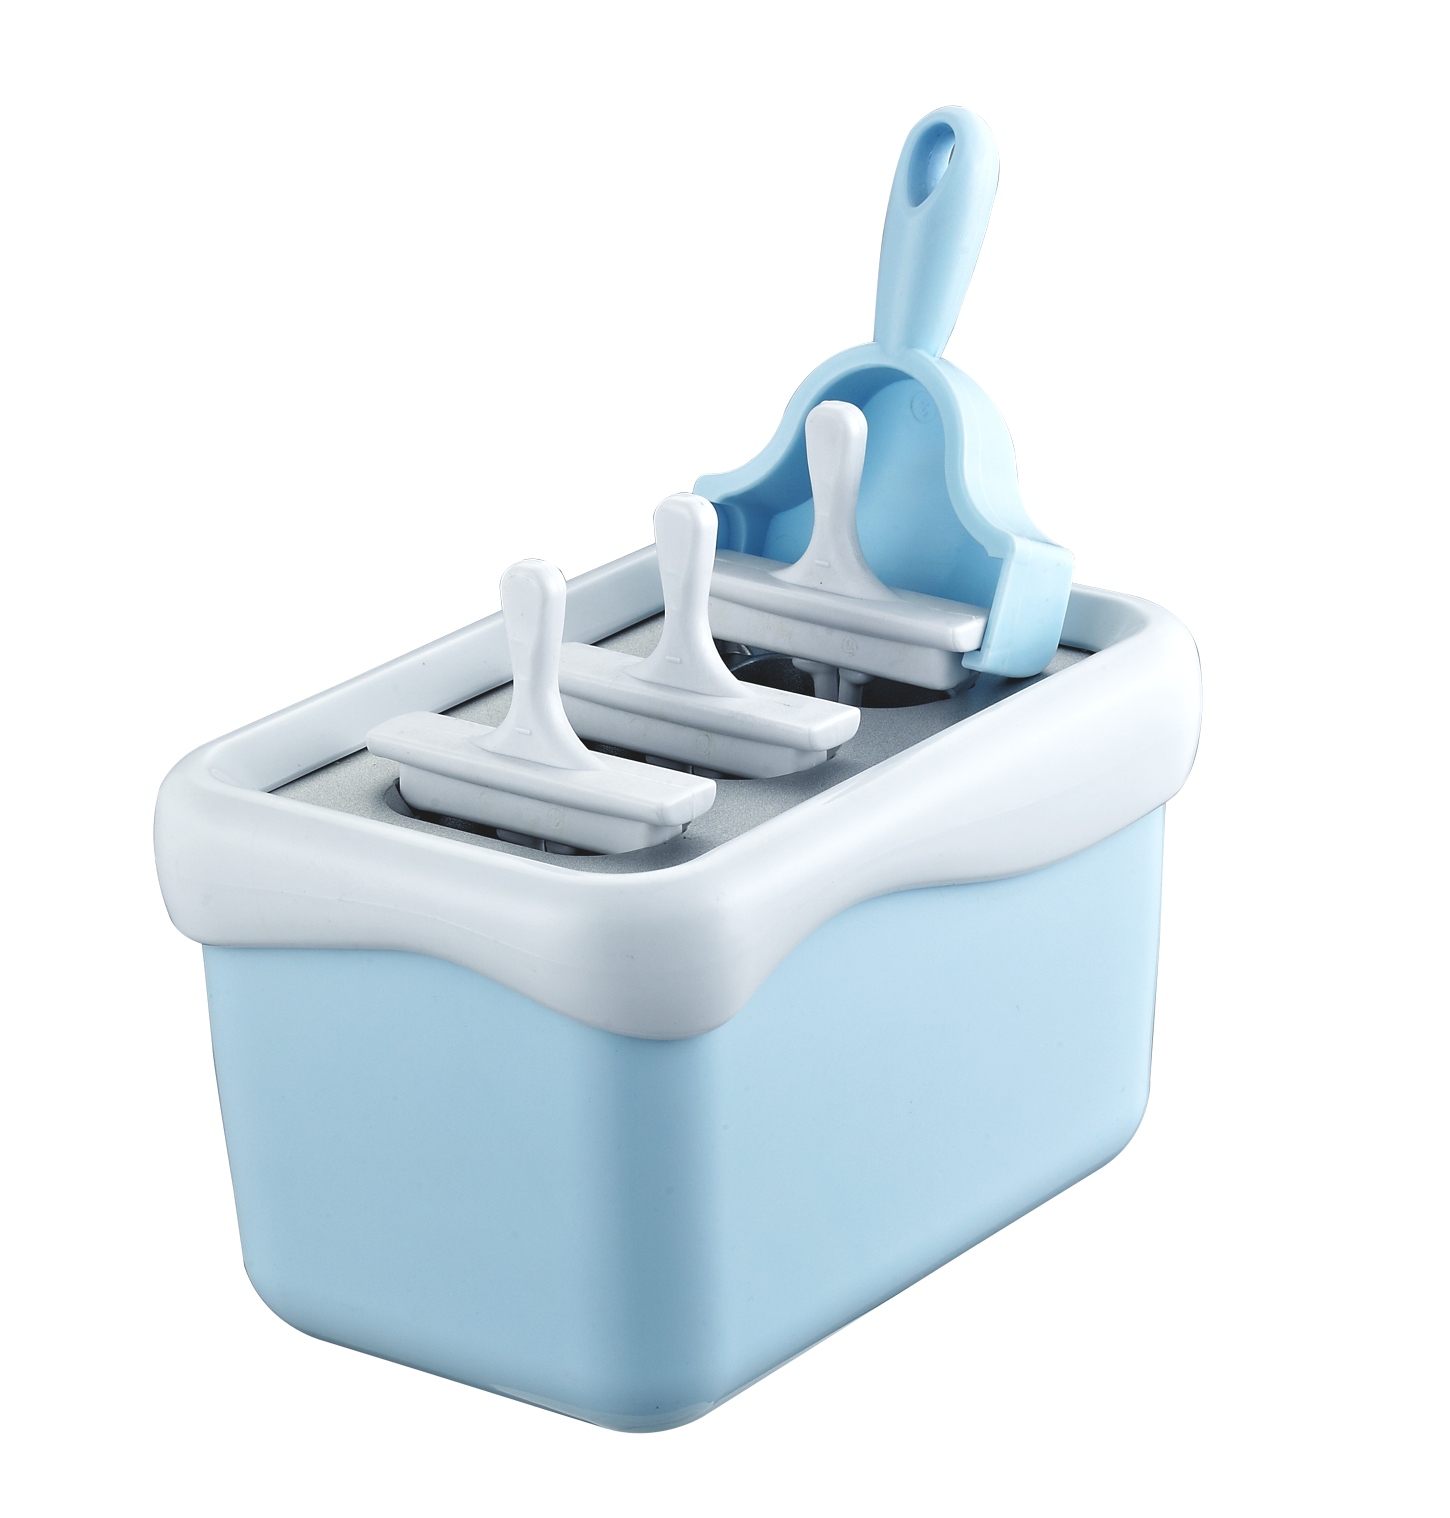 POPSICLE MAKER/makes 3 batches popsicle